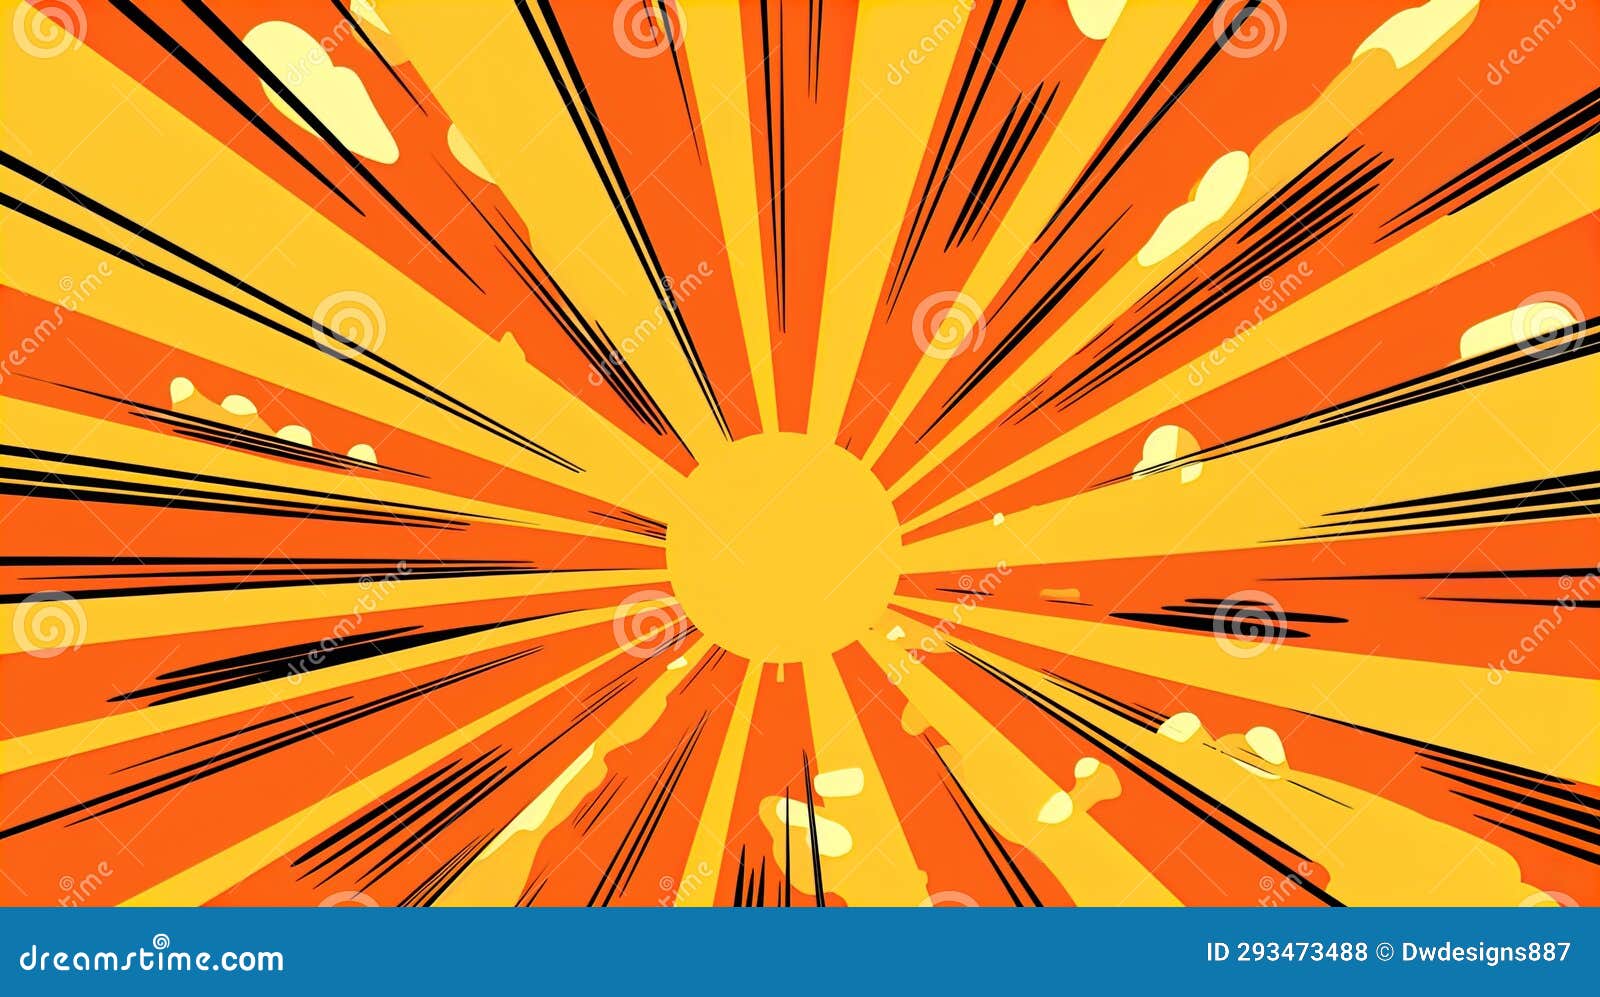 Anime Explosion Radial Effect | FootageCrate - Free FX Archives